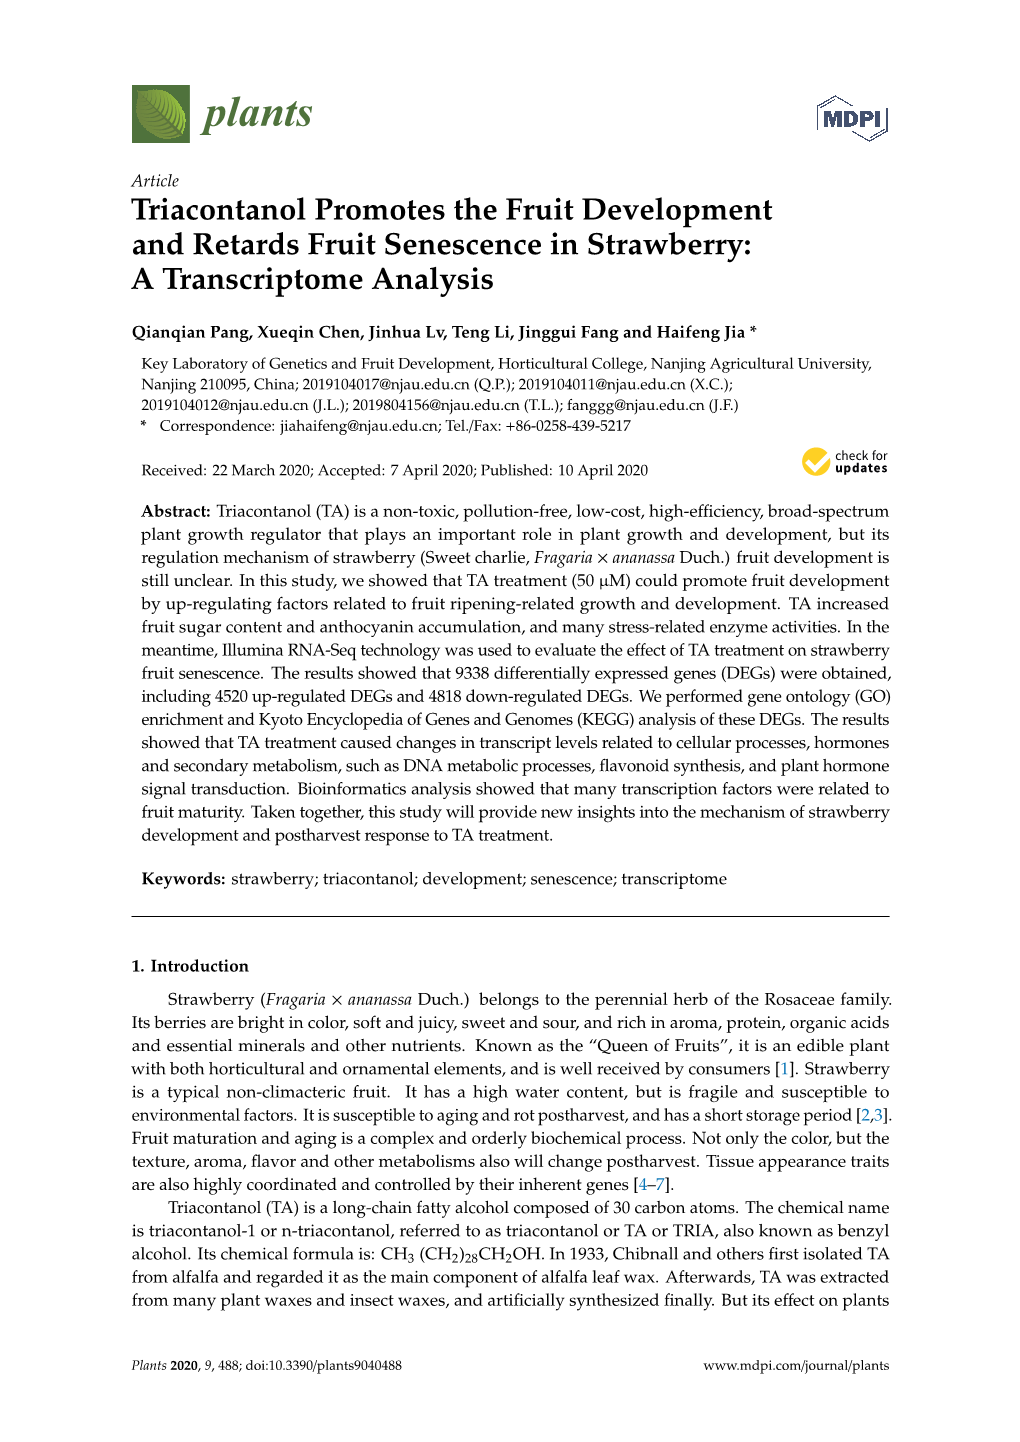 Triacontanol Promotes the Fruit Development and Retards Fruit Senescence in Strawberry: a Transcriptome Analysis